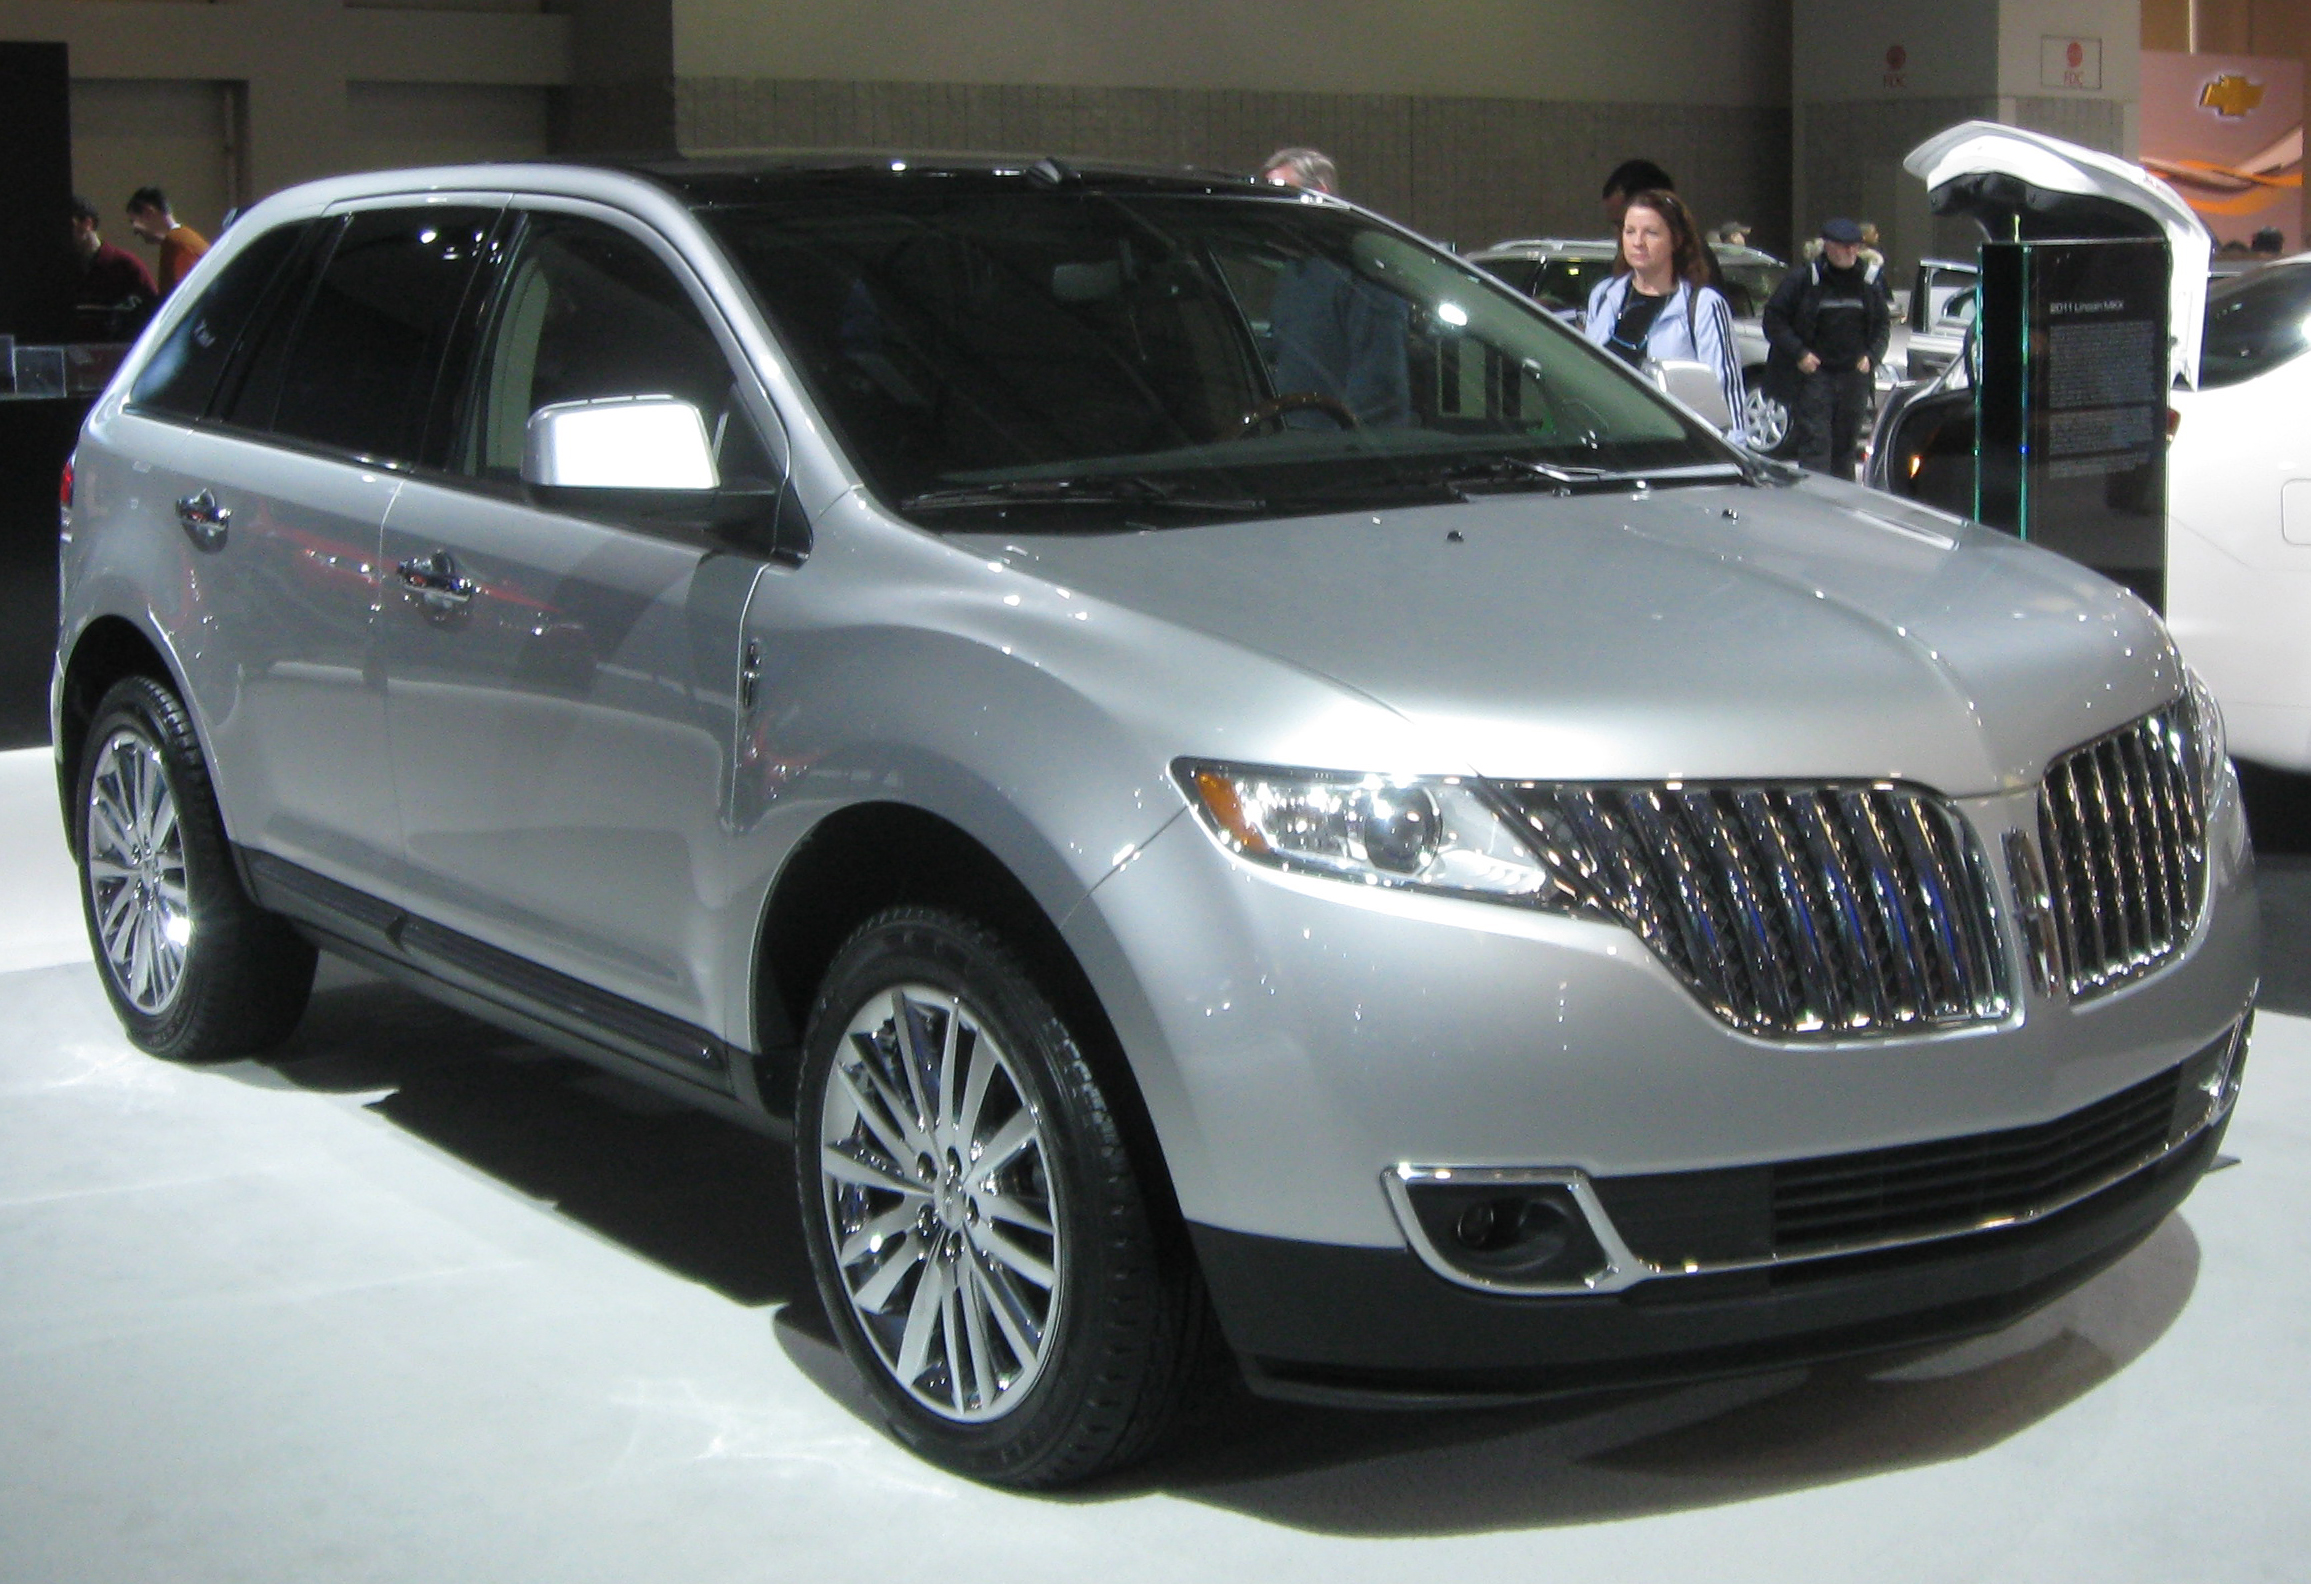 File:2011 Lincoln MKX -- 2010 DC.jpg - Wikimedia Commons